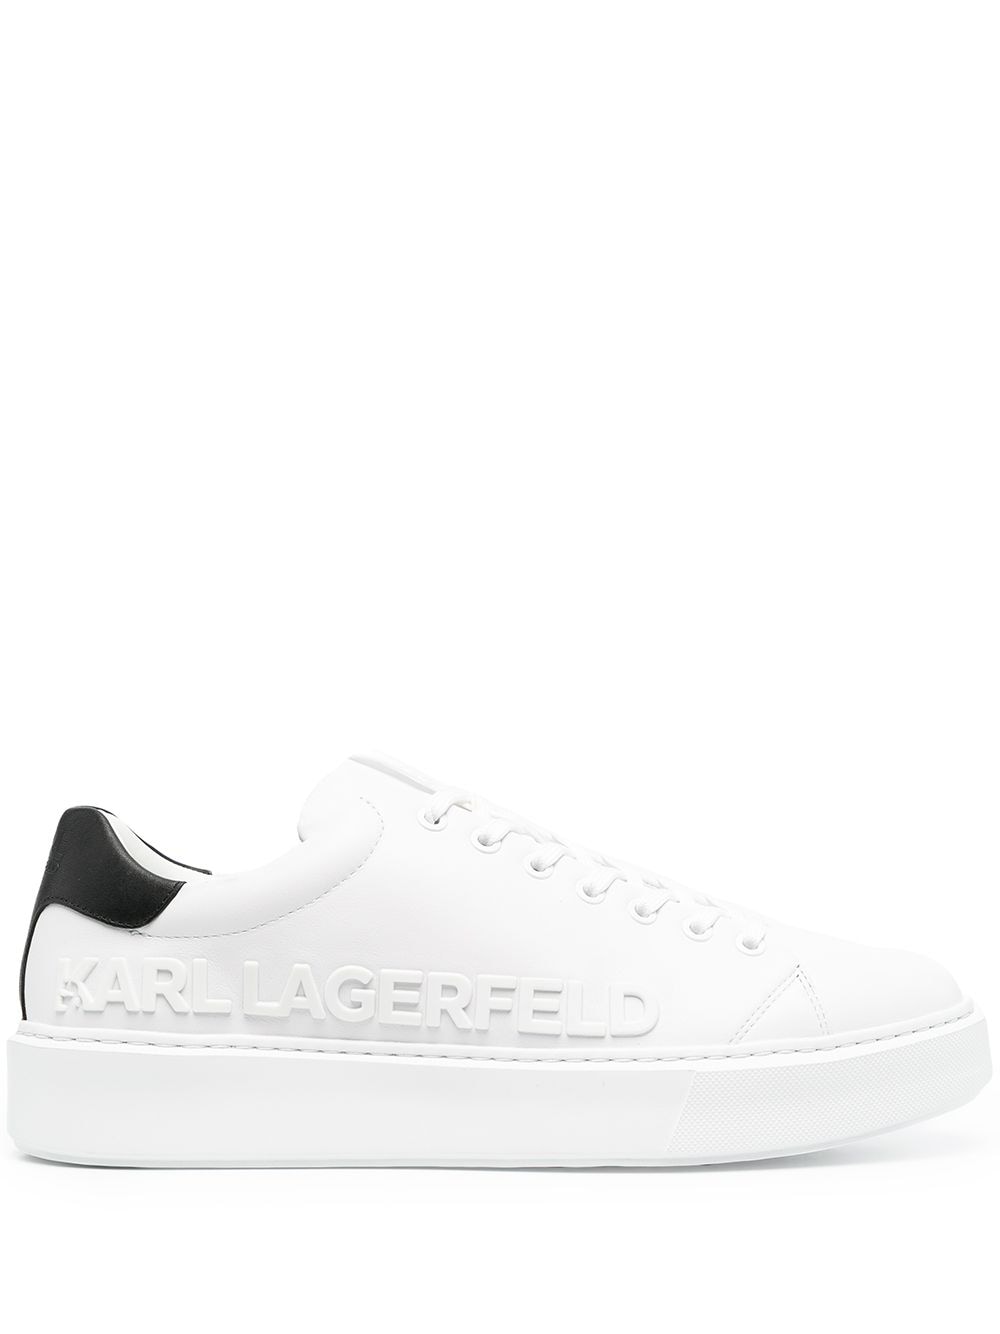 Karl Lagerfeld Debossed Leather lace-up Sneakers - Farfetch